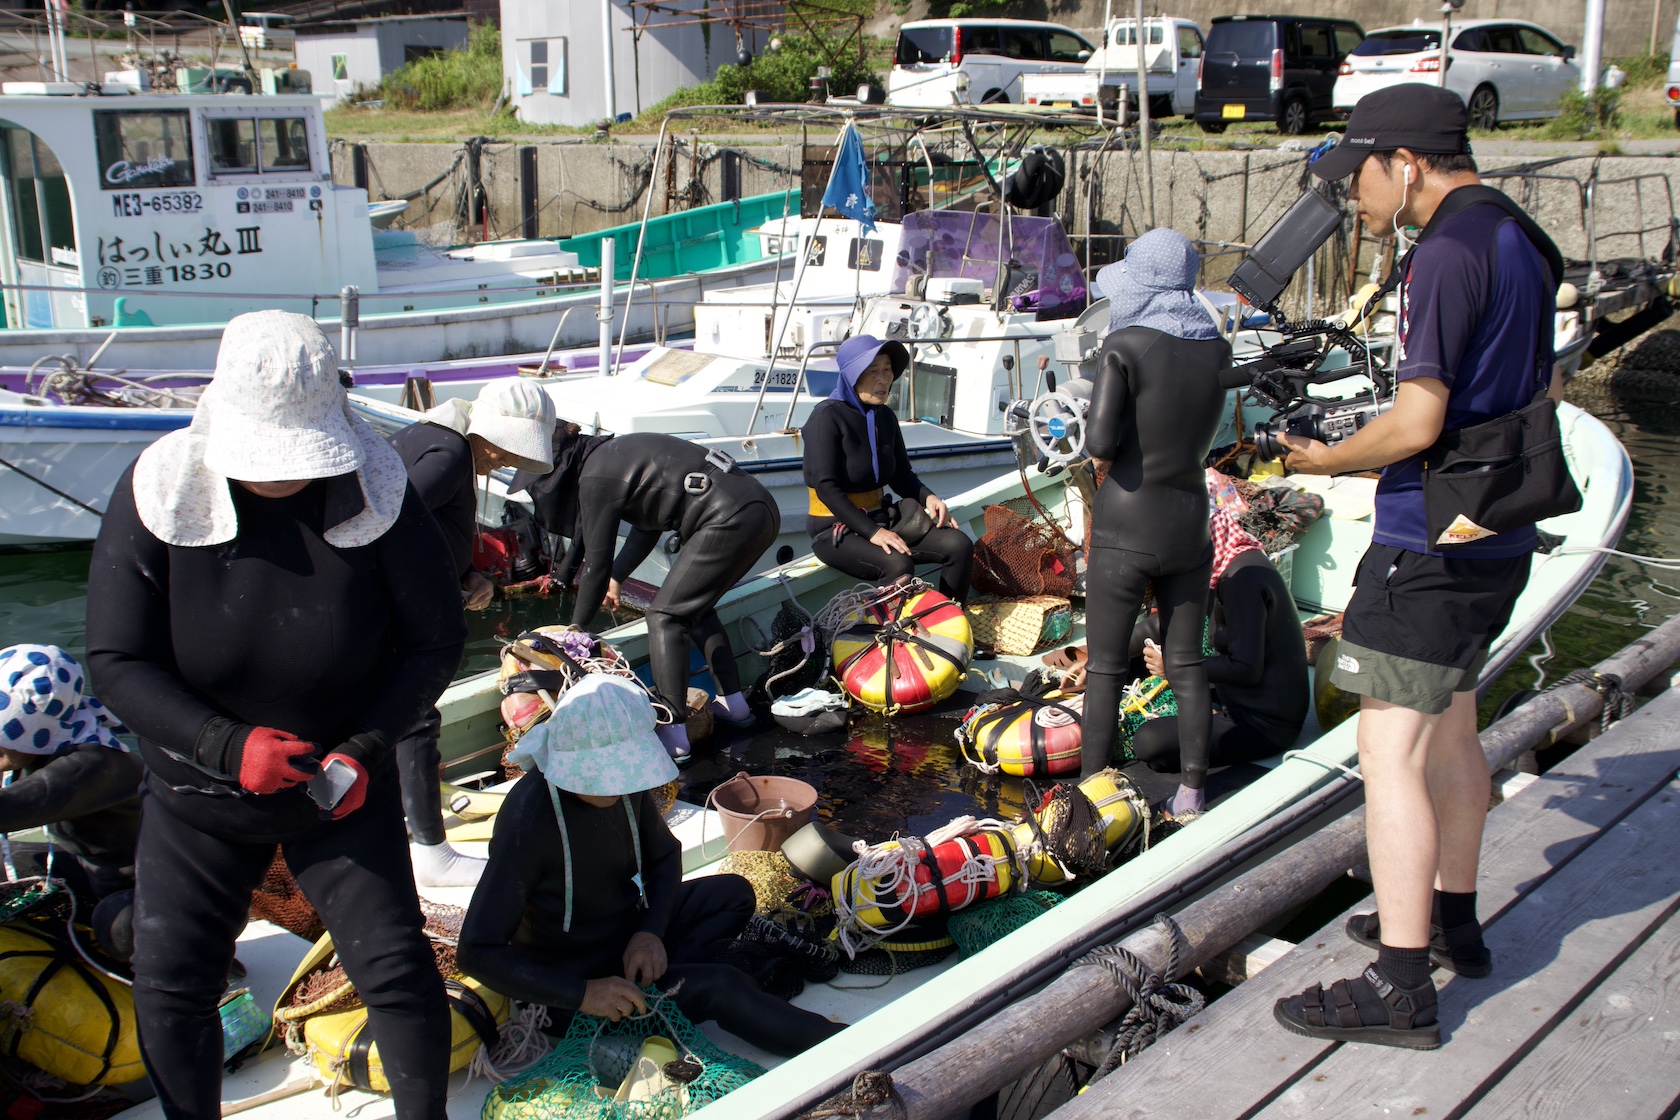 A group of ama (female divers) prepare their boat as a TV crew member films.